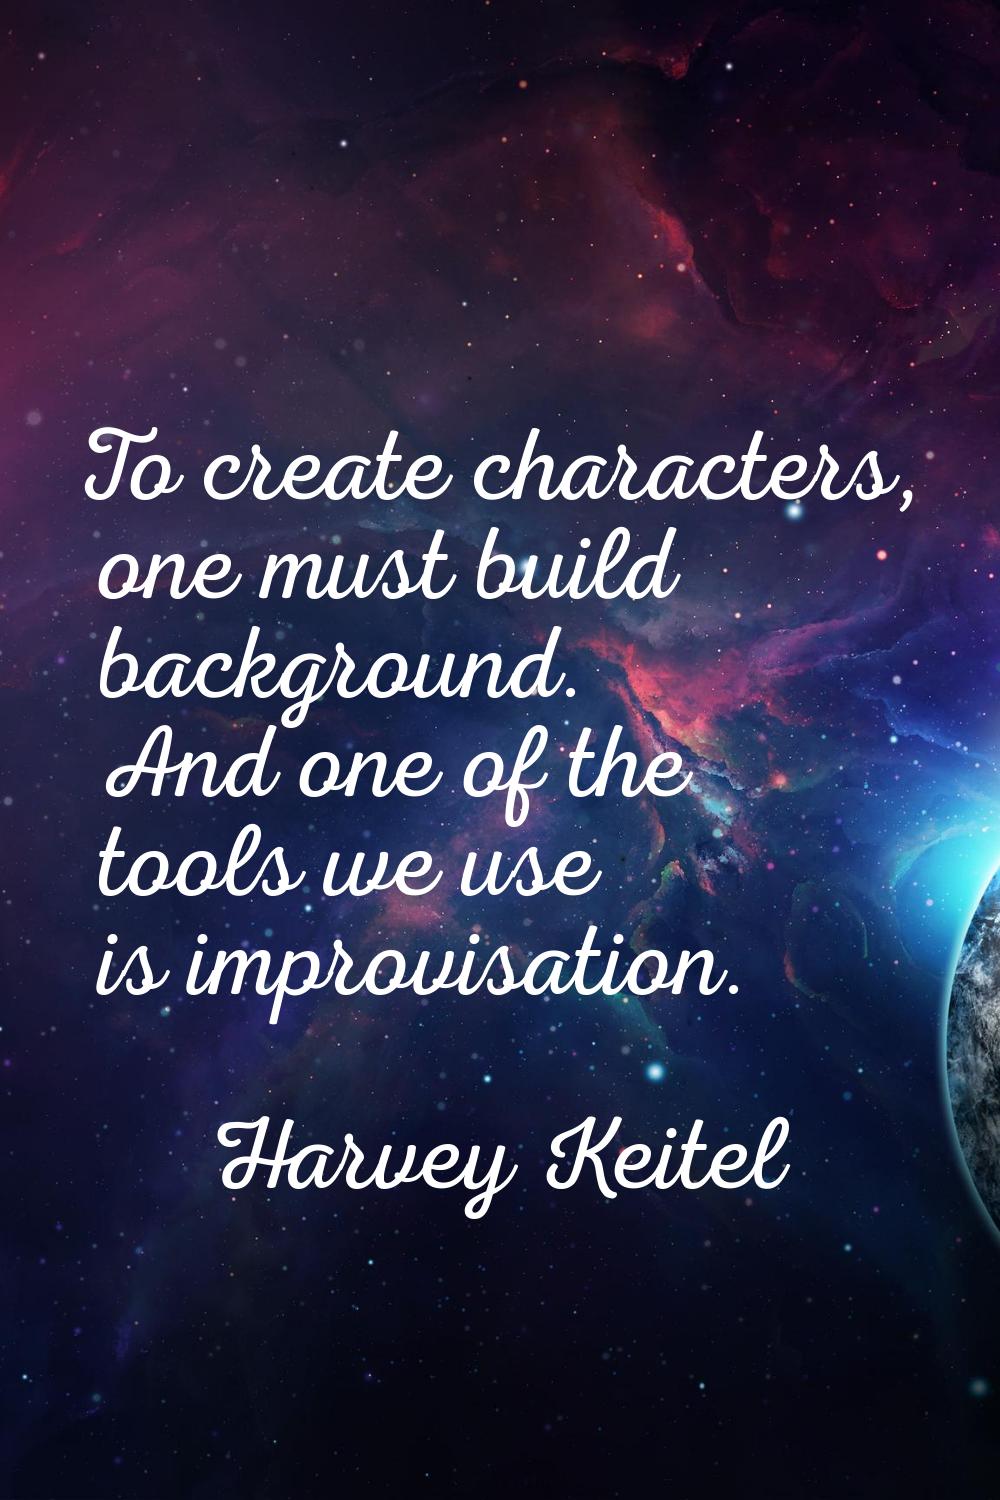 To create characters, one must build background. And one of the tools we use is improvisation.